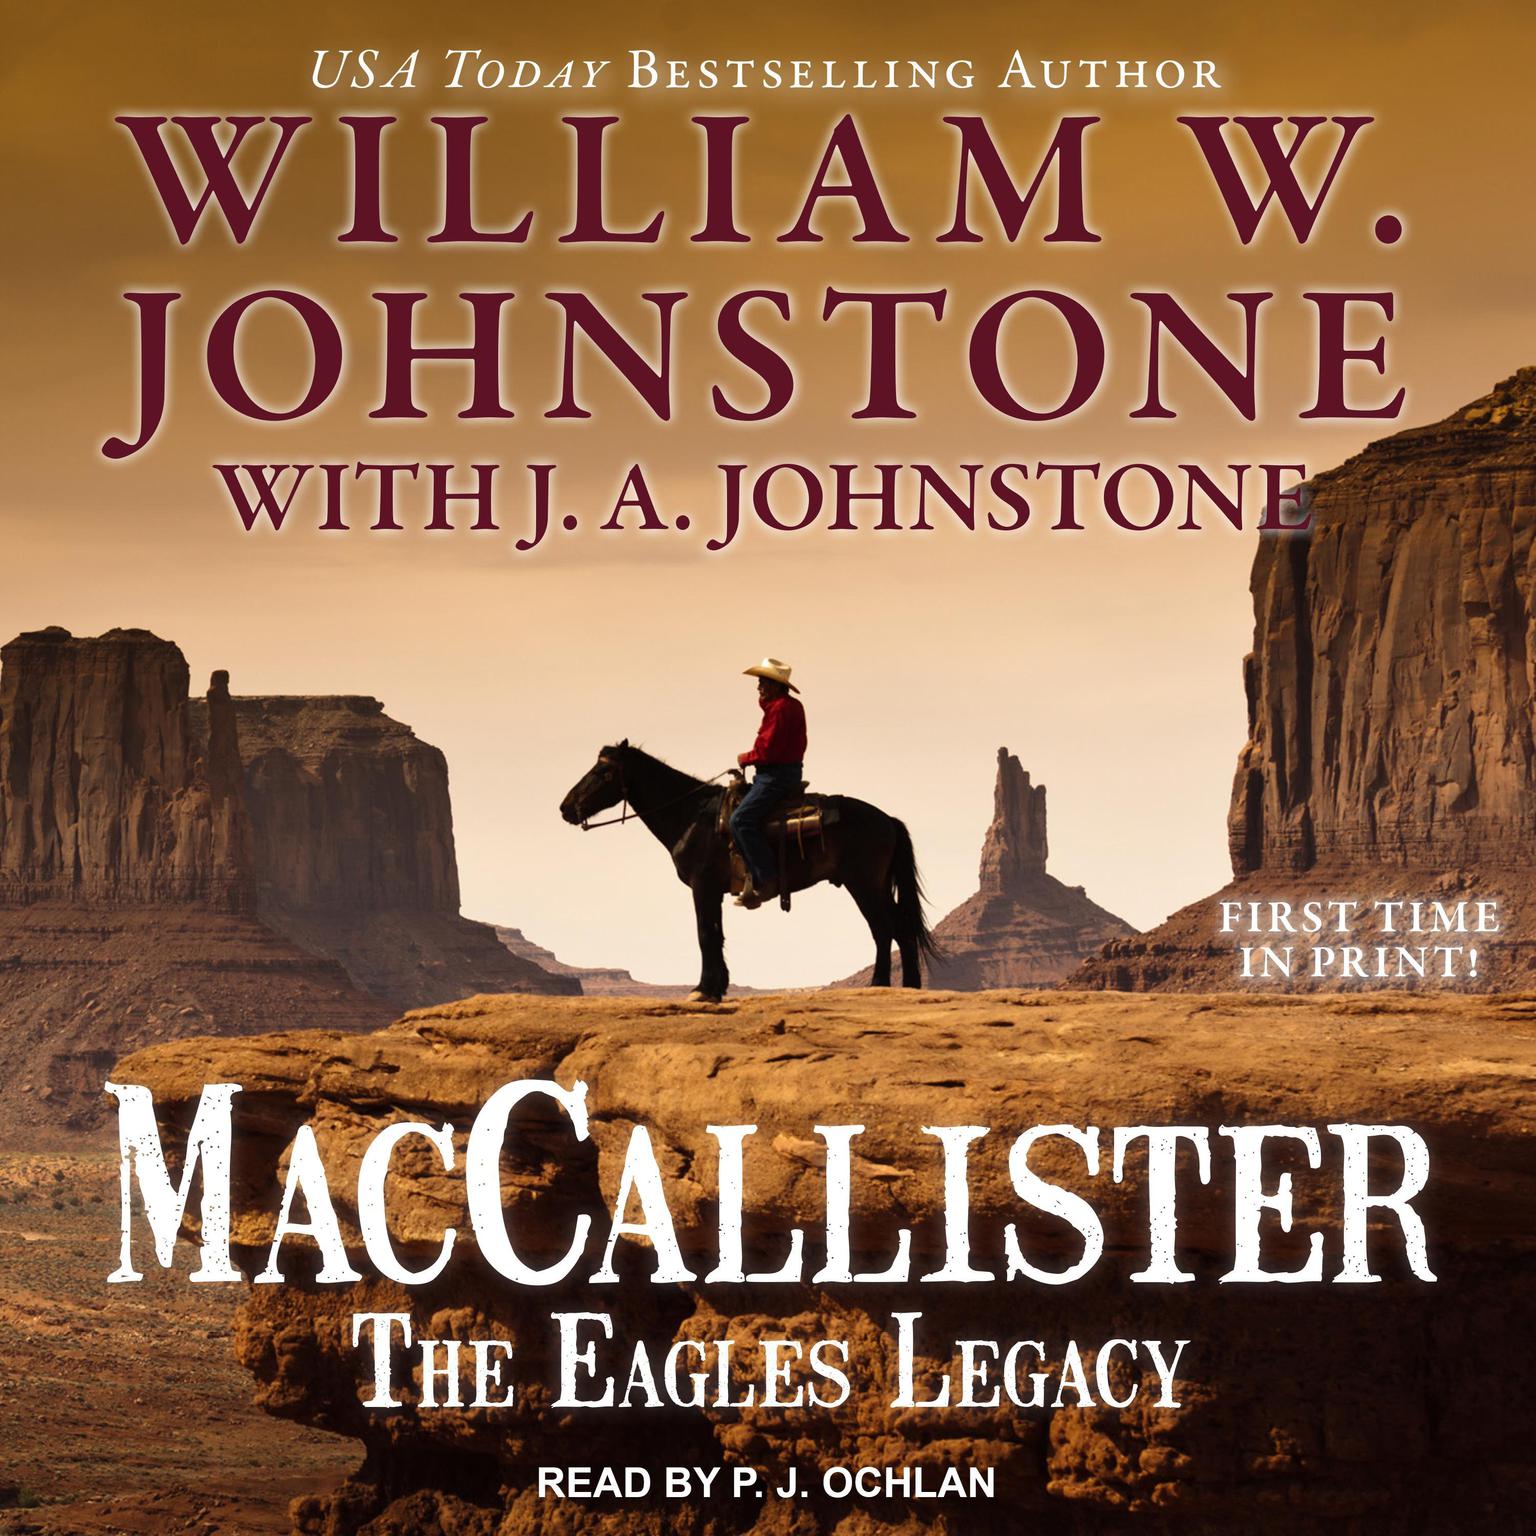 MacCallister: The Eagles Legacy Audiobook, by William W. Johnstone